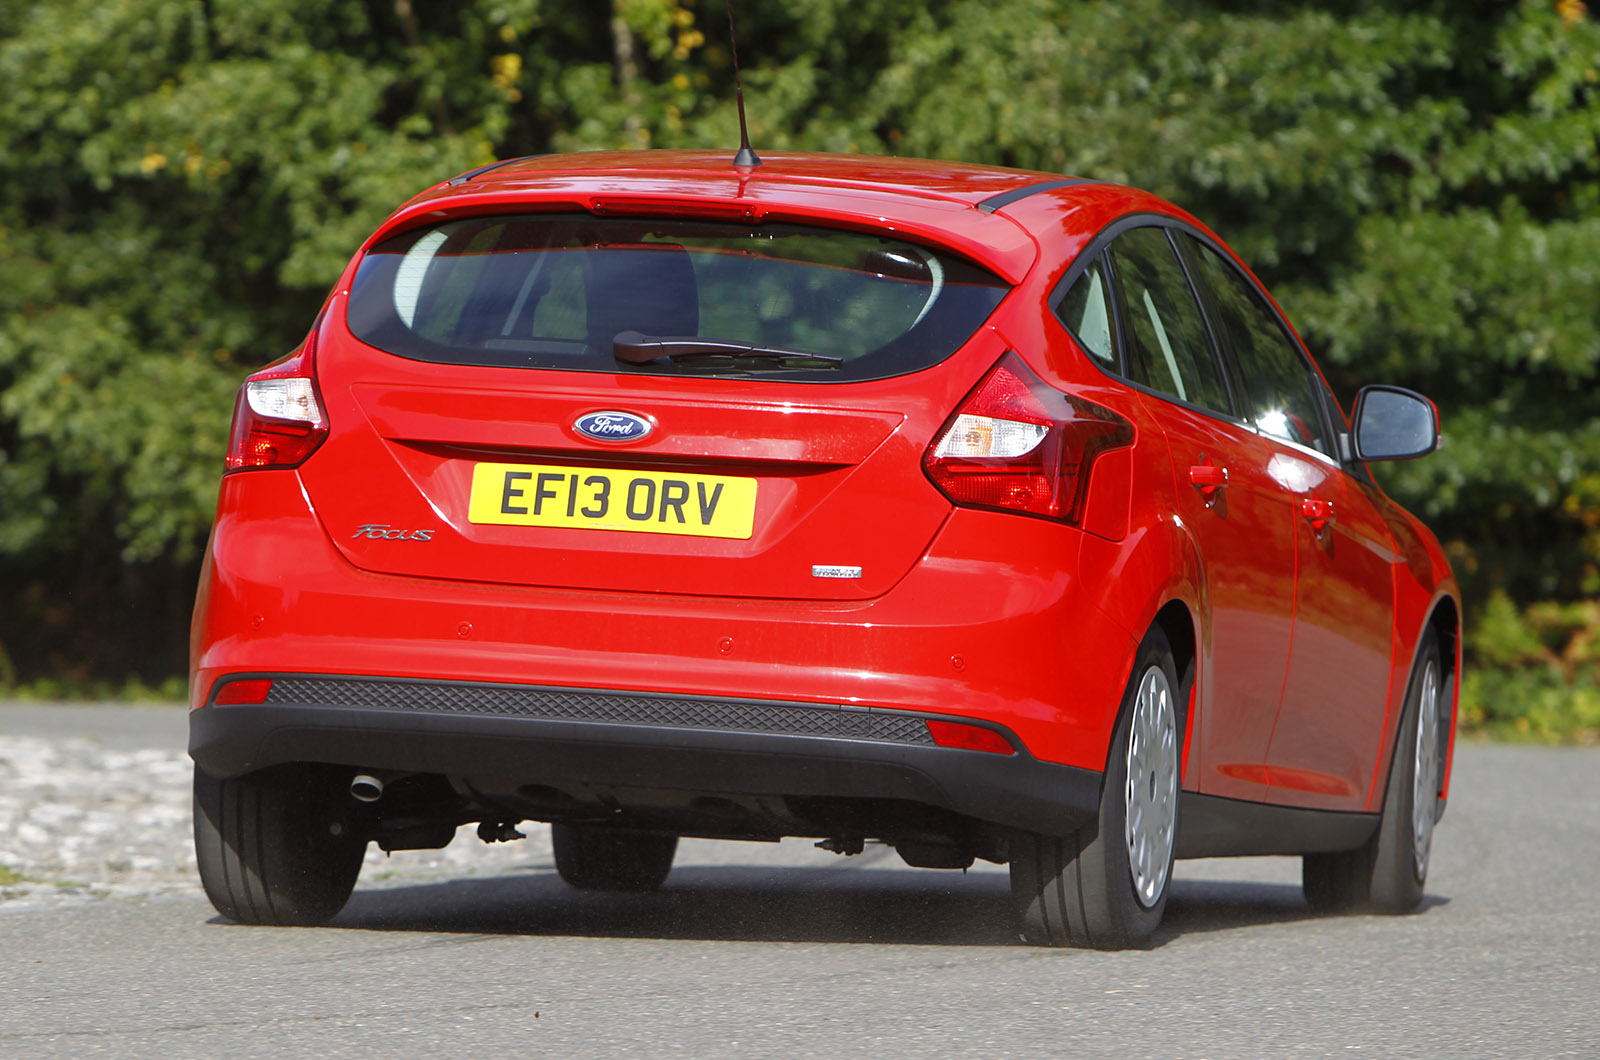 Ford focus 1.6 tdci econetic reviews #6